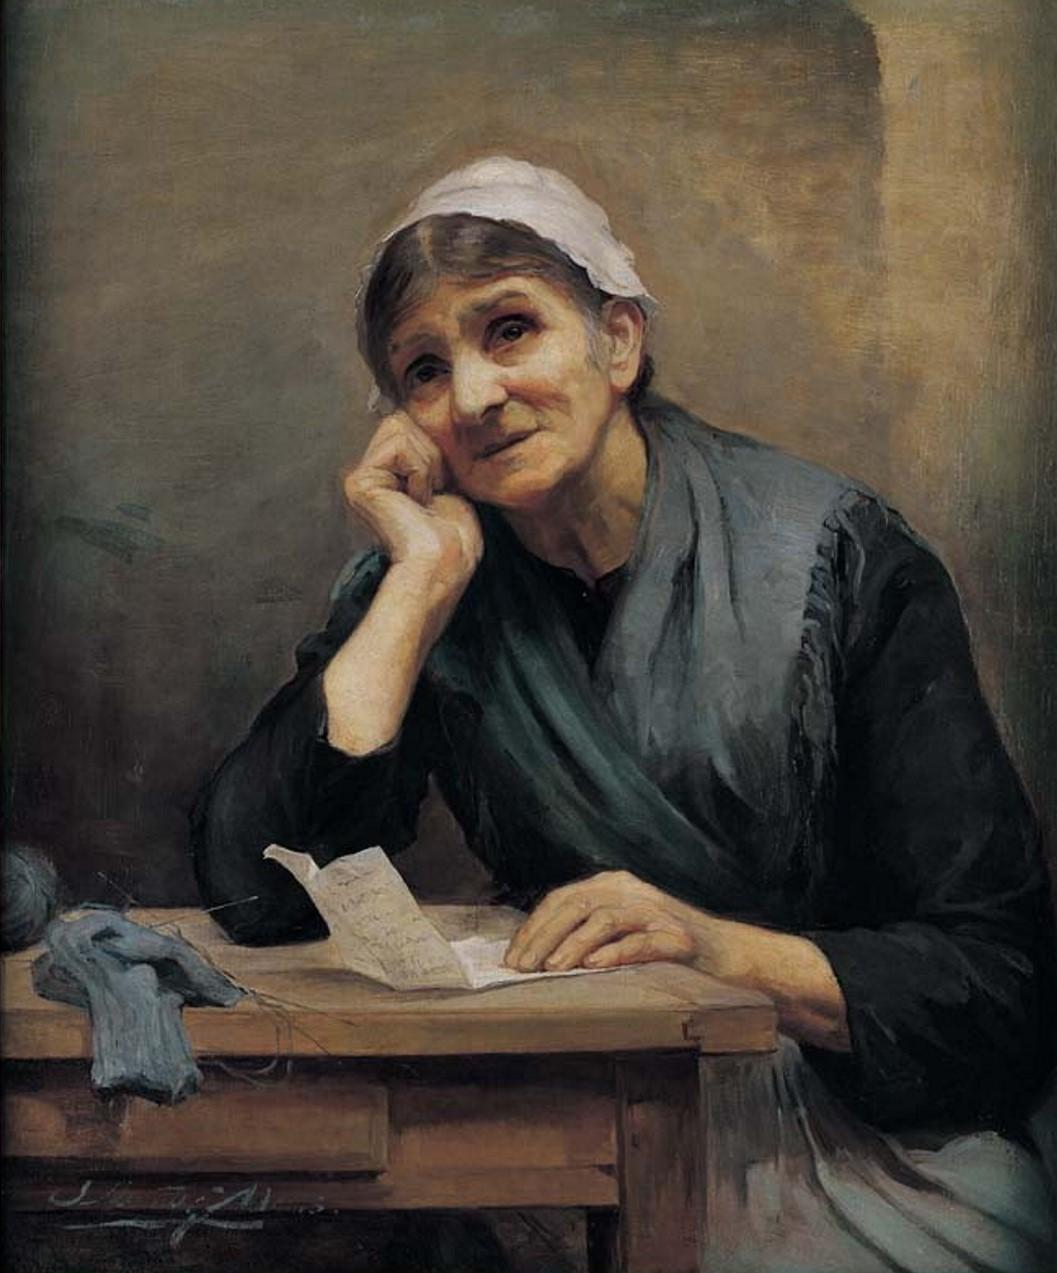 A portrait of an elderly woman sitting at a table with her head leaning against one hand, that is propped up on the table. The other hand rests on a letter that sits on the table, next to some knitting needles and yarn.